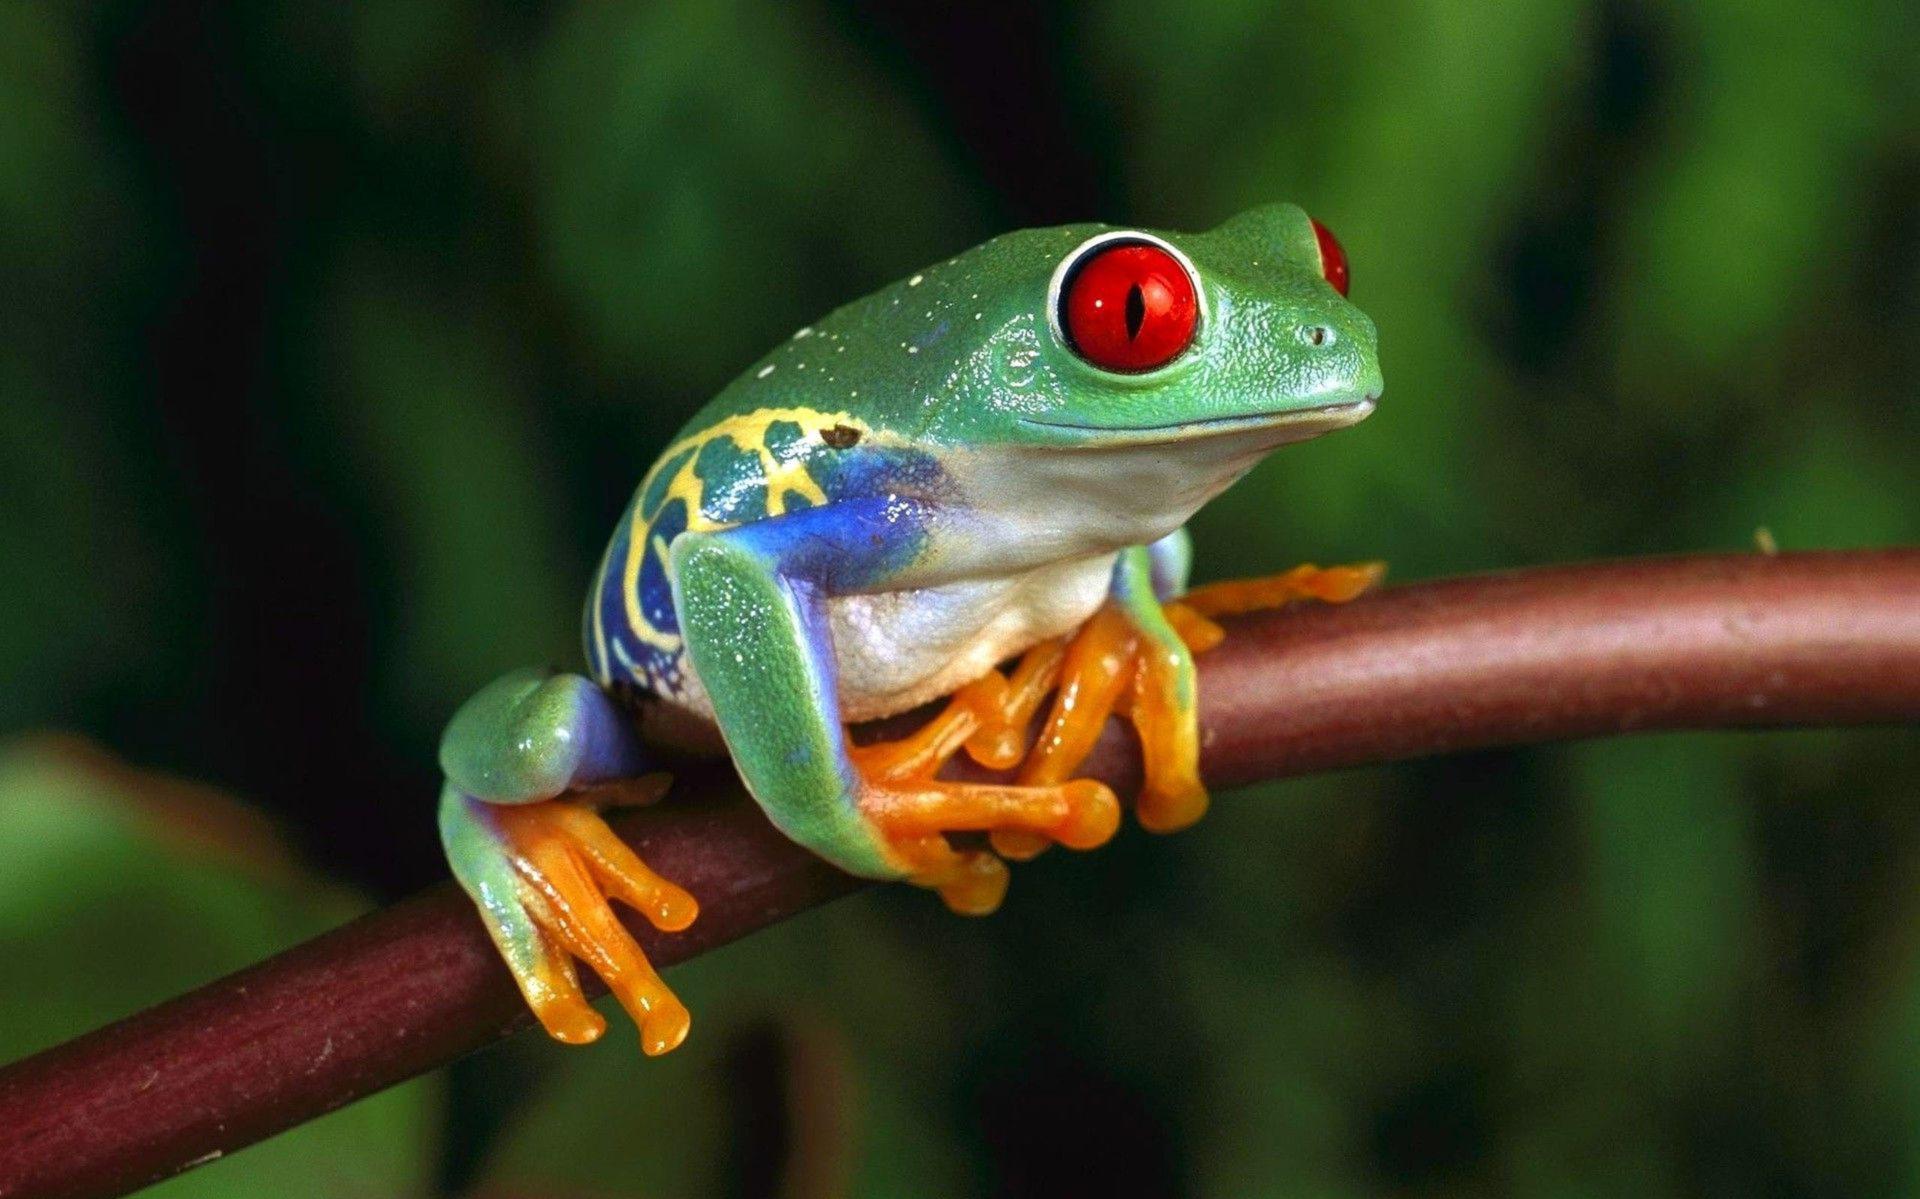 Green Frog With Red Eyes 4k Ultra Hd Wallpapers For Computer And